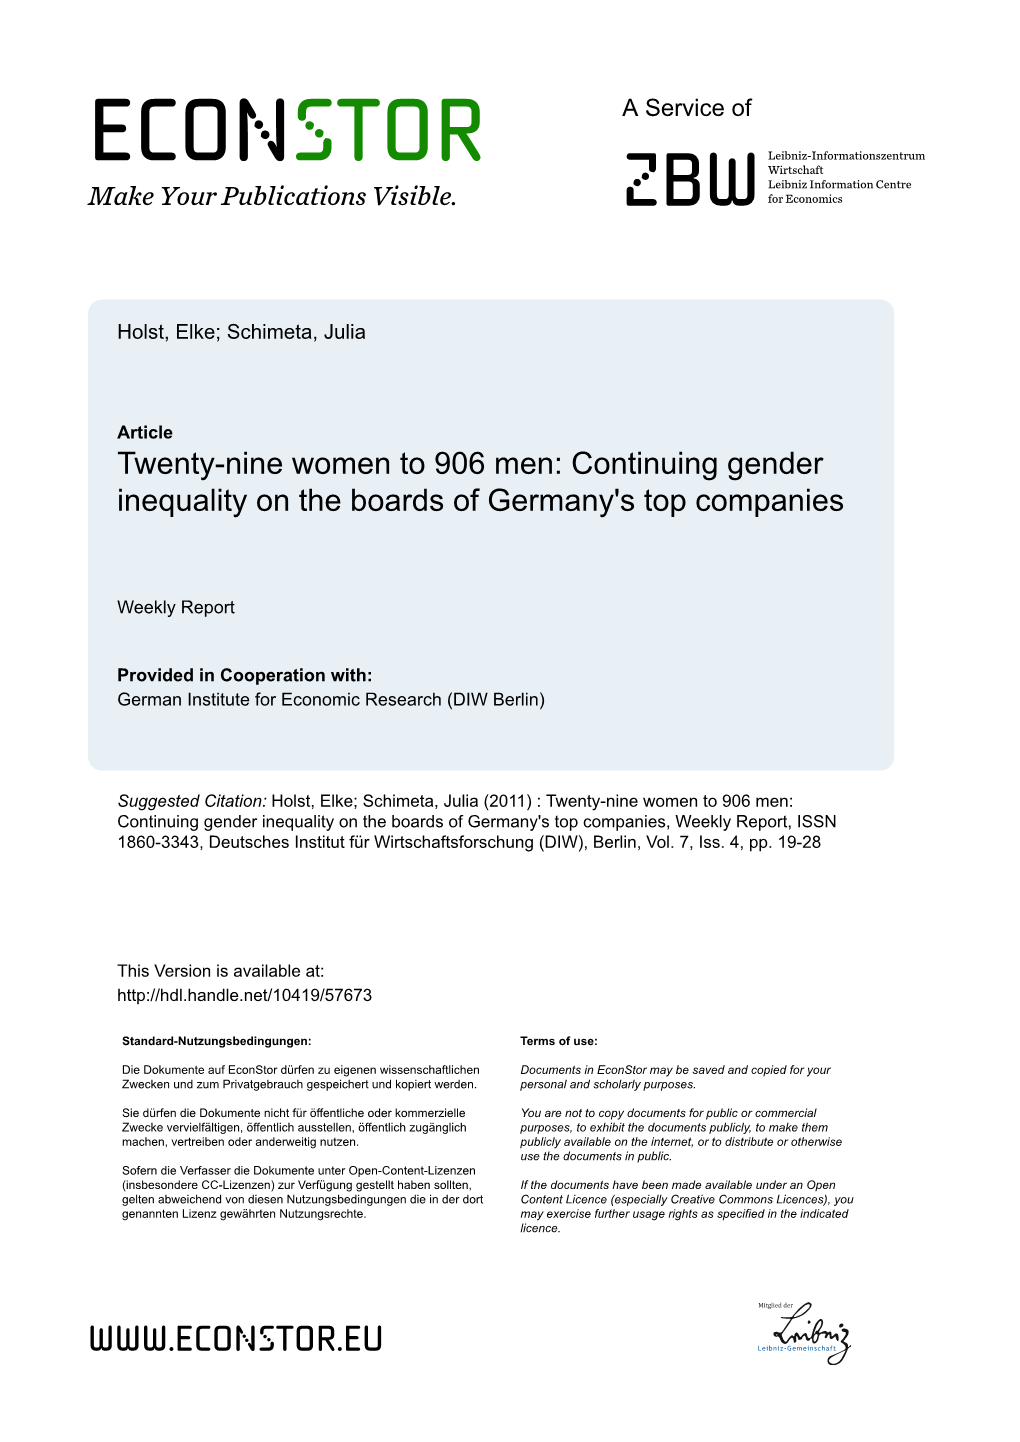 Twenty-Nine Women to 906 Men: Continuing Gender Inequality on the Boards of Germany's Top Companies